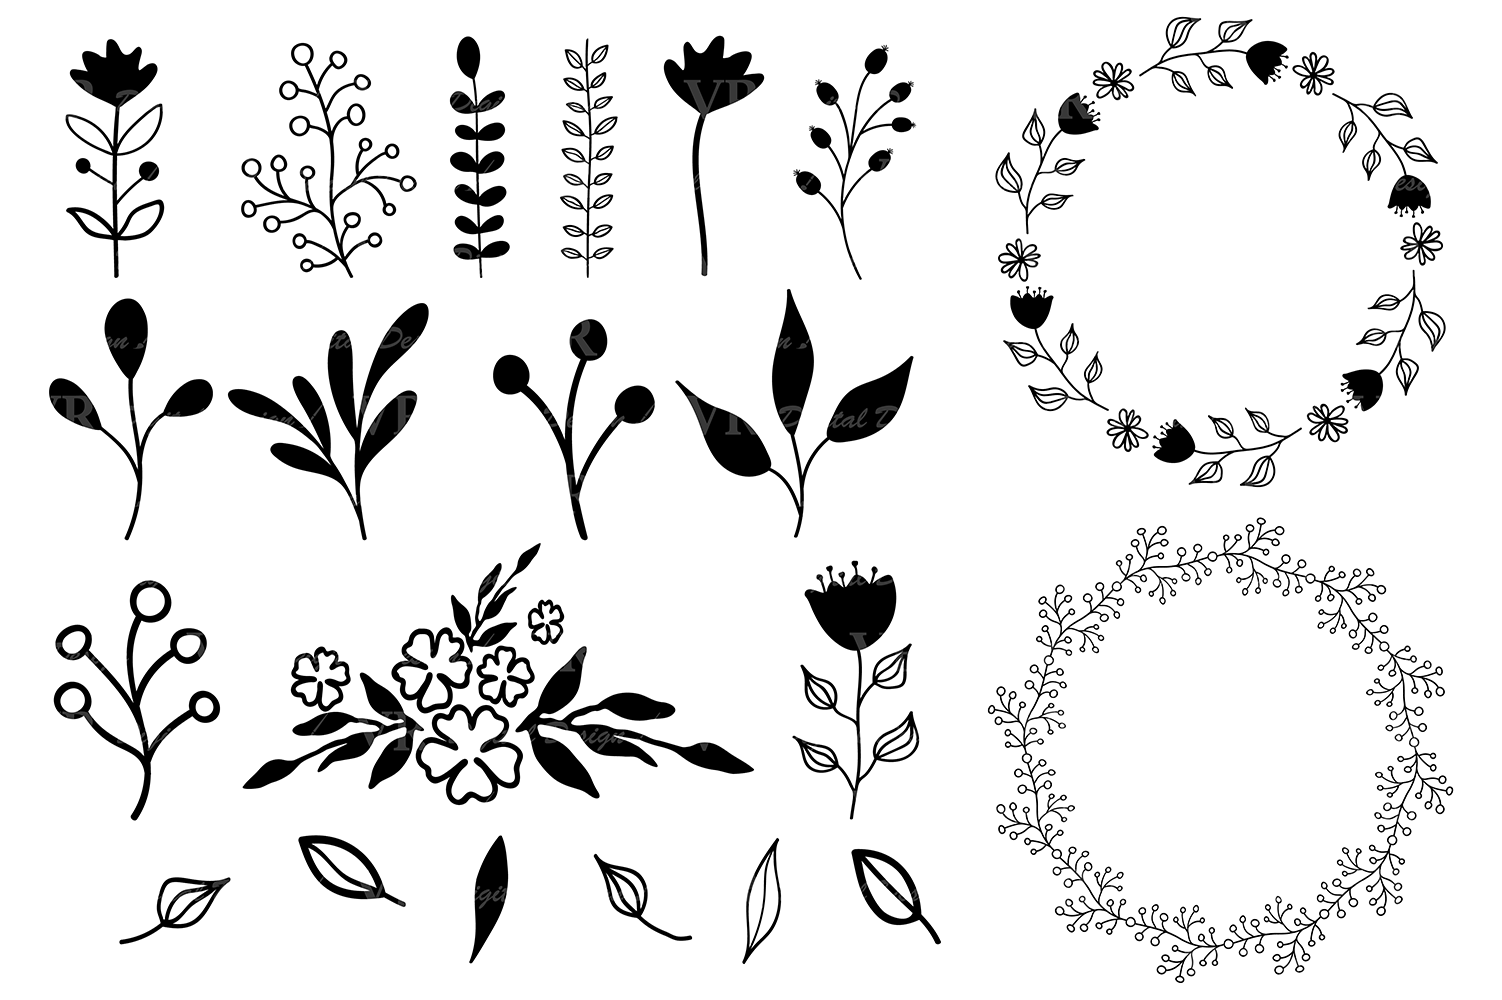 Hand drawn wreaths, laurels and design elements vector clipart By VR ...